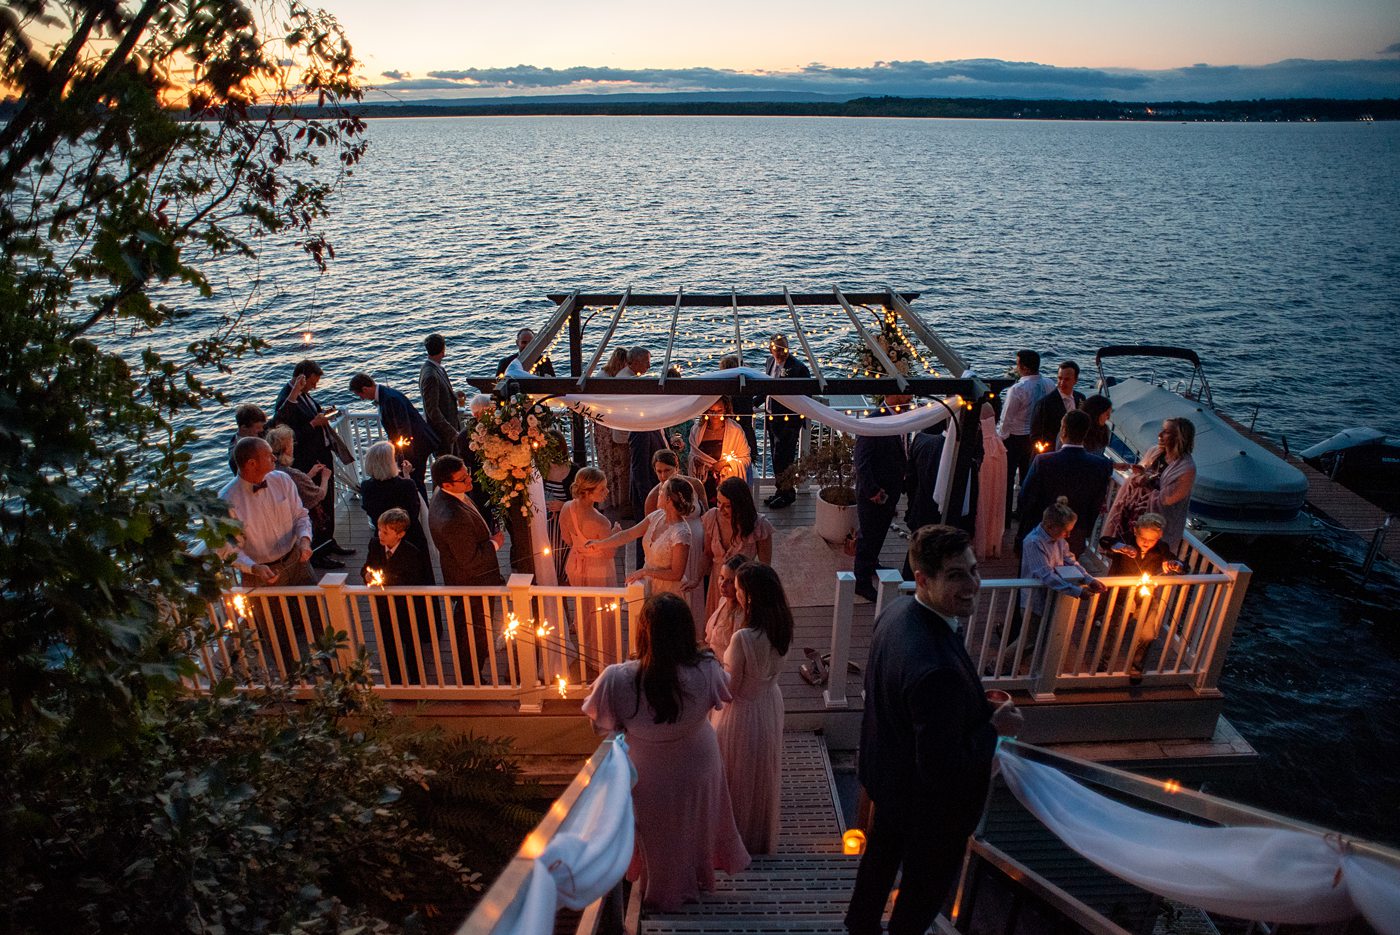 Saratoga Springs destination wedding photos in upstate New York by Mikkel Paige Photography, NY wedding photographer. The bride and groom tented a home for their reception. Guests lit sparklers at dusk after sun set on Saratoga Lake. #mikkelpaige #saratogaspringswedding #destinationwedding #lakefrontwedding #waterfrontwedding #lakewedding #tablenumbers #weddingreception #intimatewedding #sparklers